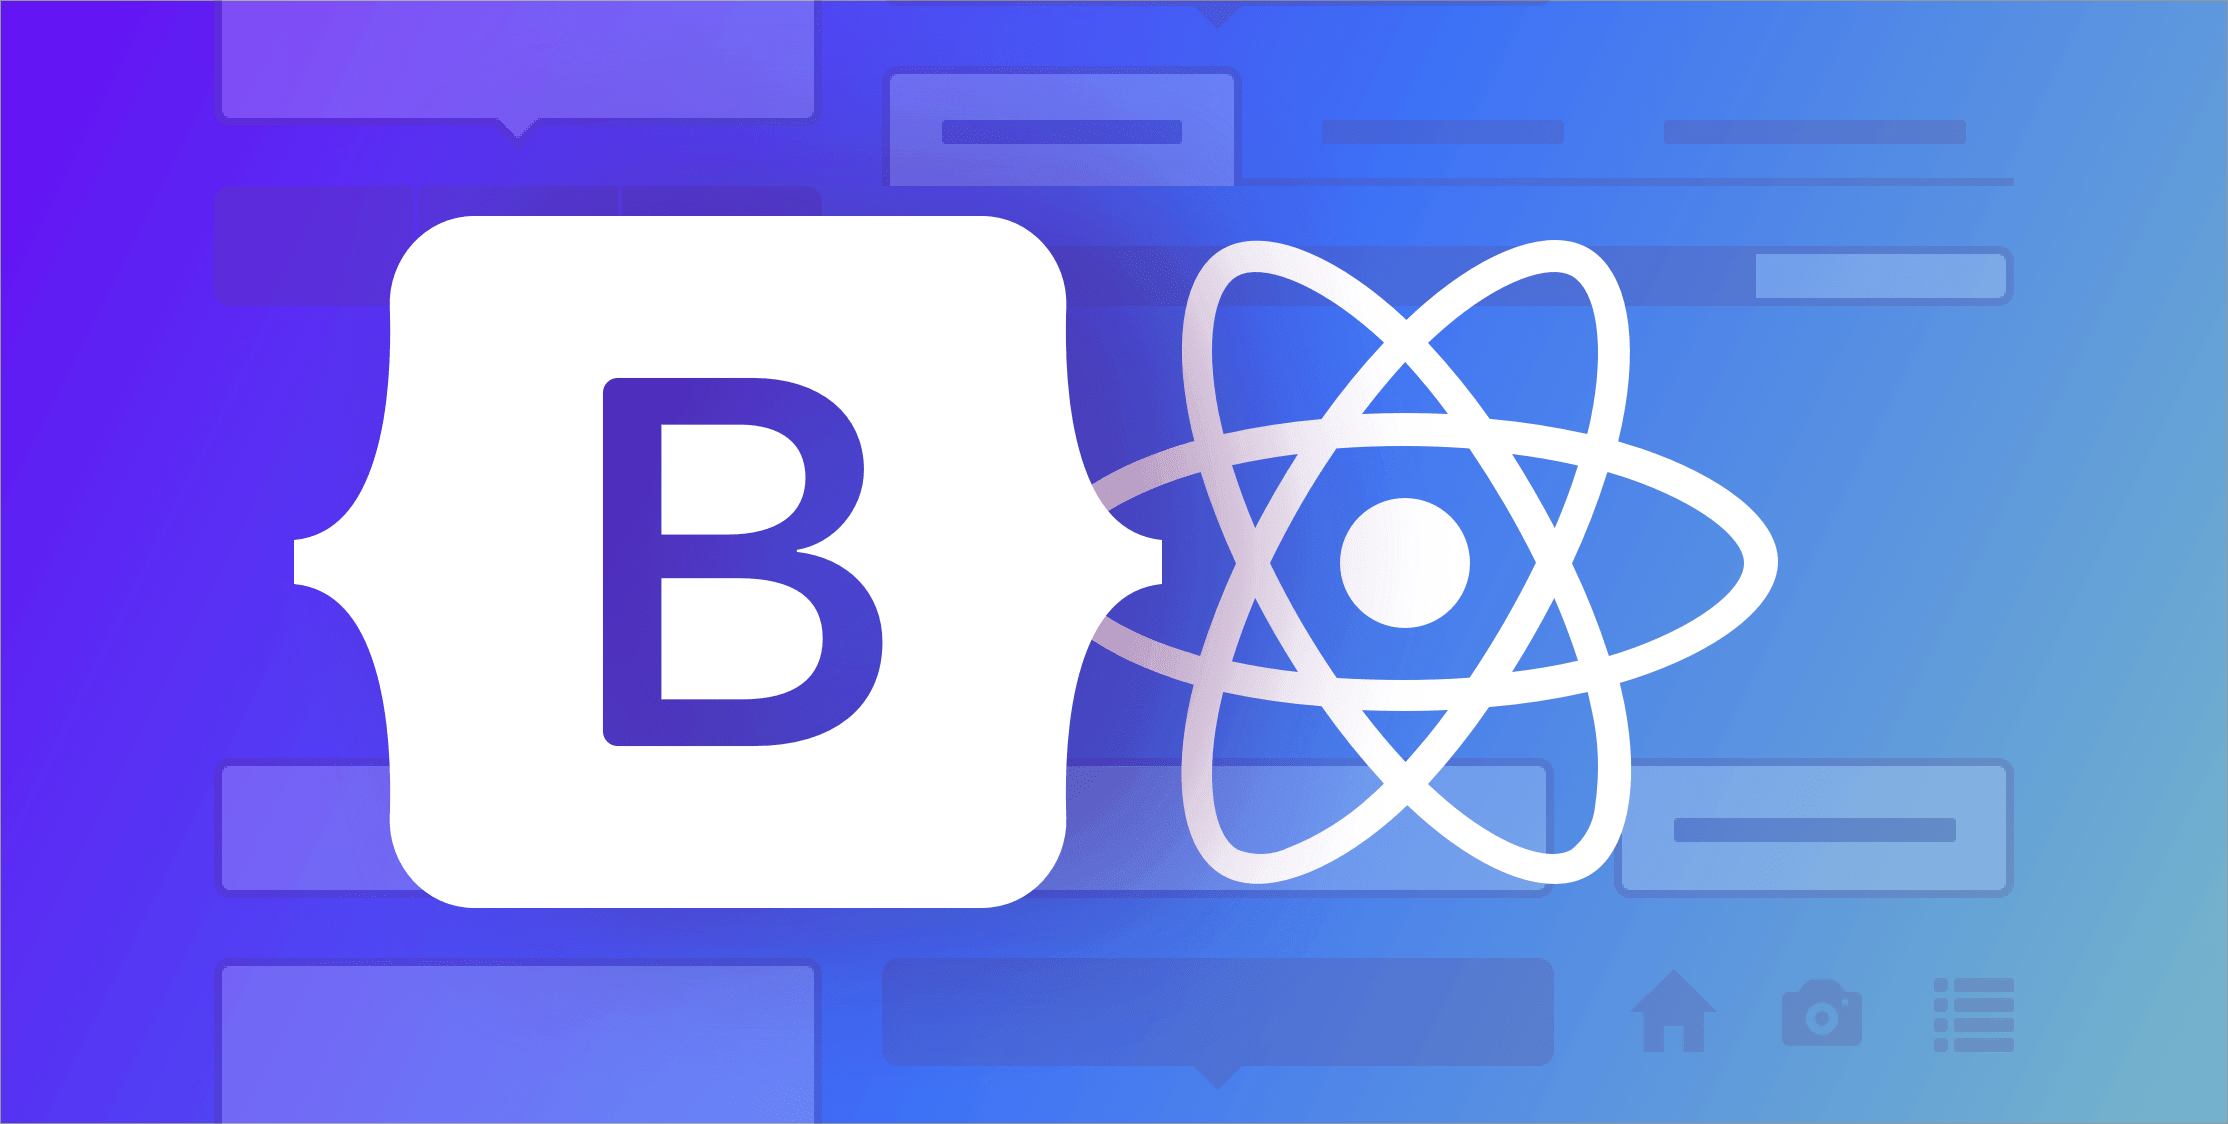 Integrate Bootstrap in your React Projects with these 2 libraries